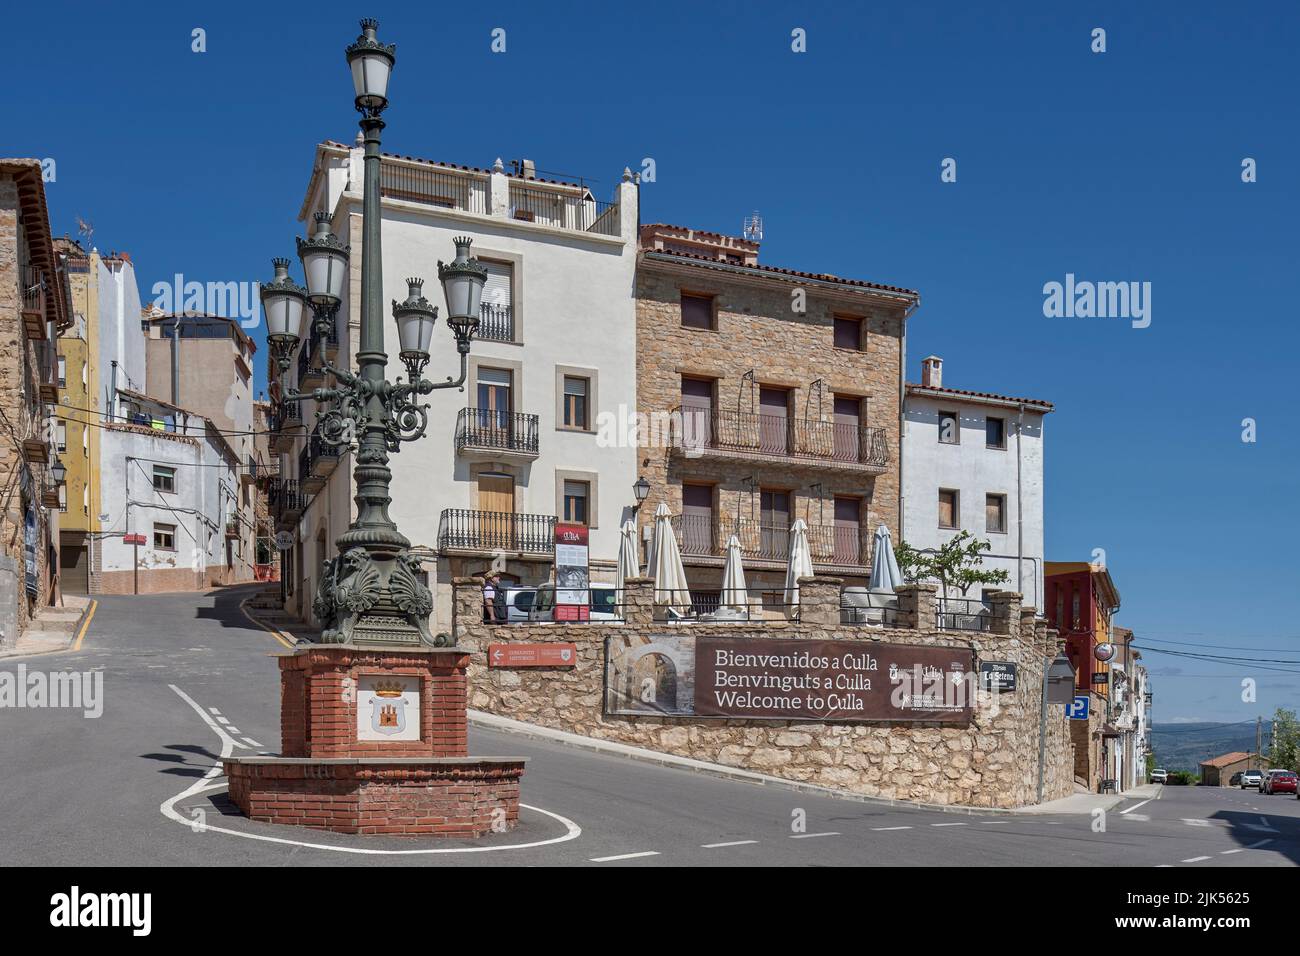 roundabout with a beautiful lamppost welcoming Culla. Most beautiful town in Spain, Castellon, Valencia Community Stock Photo